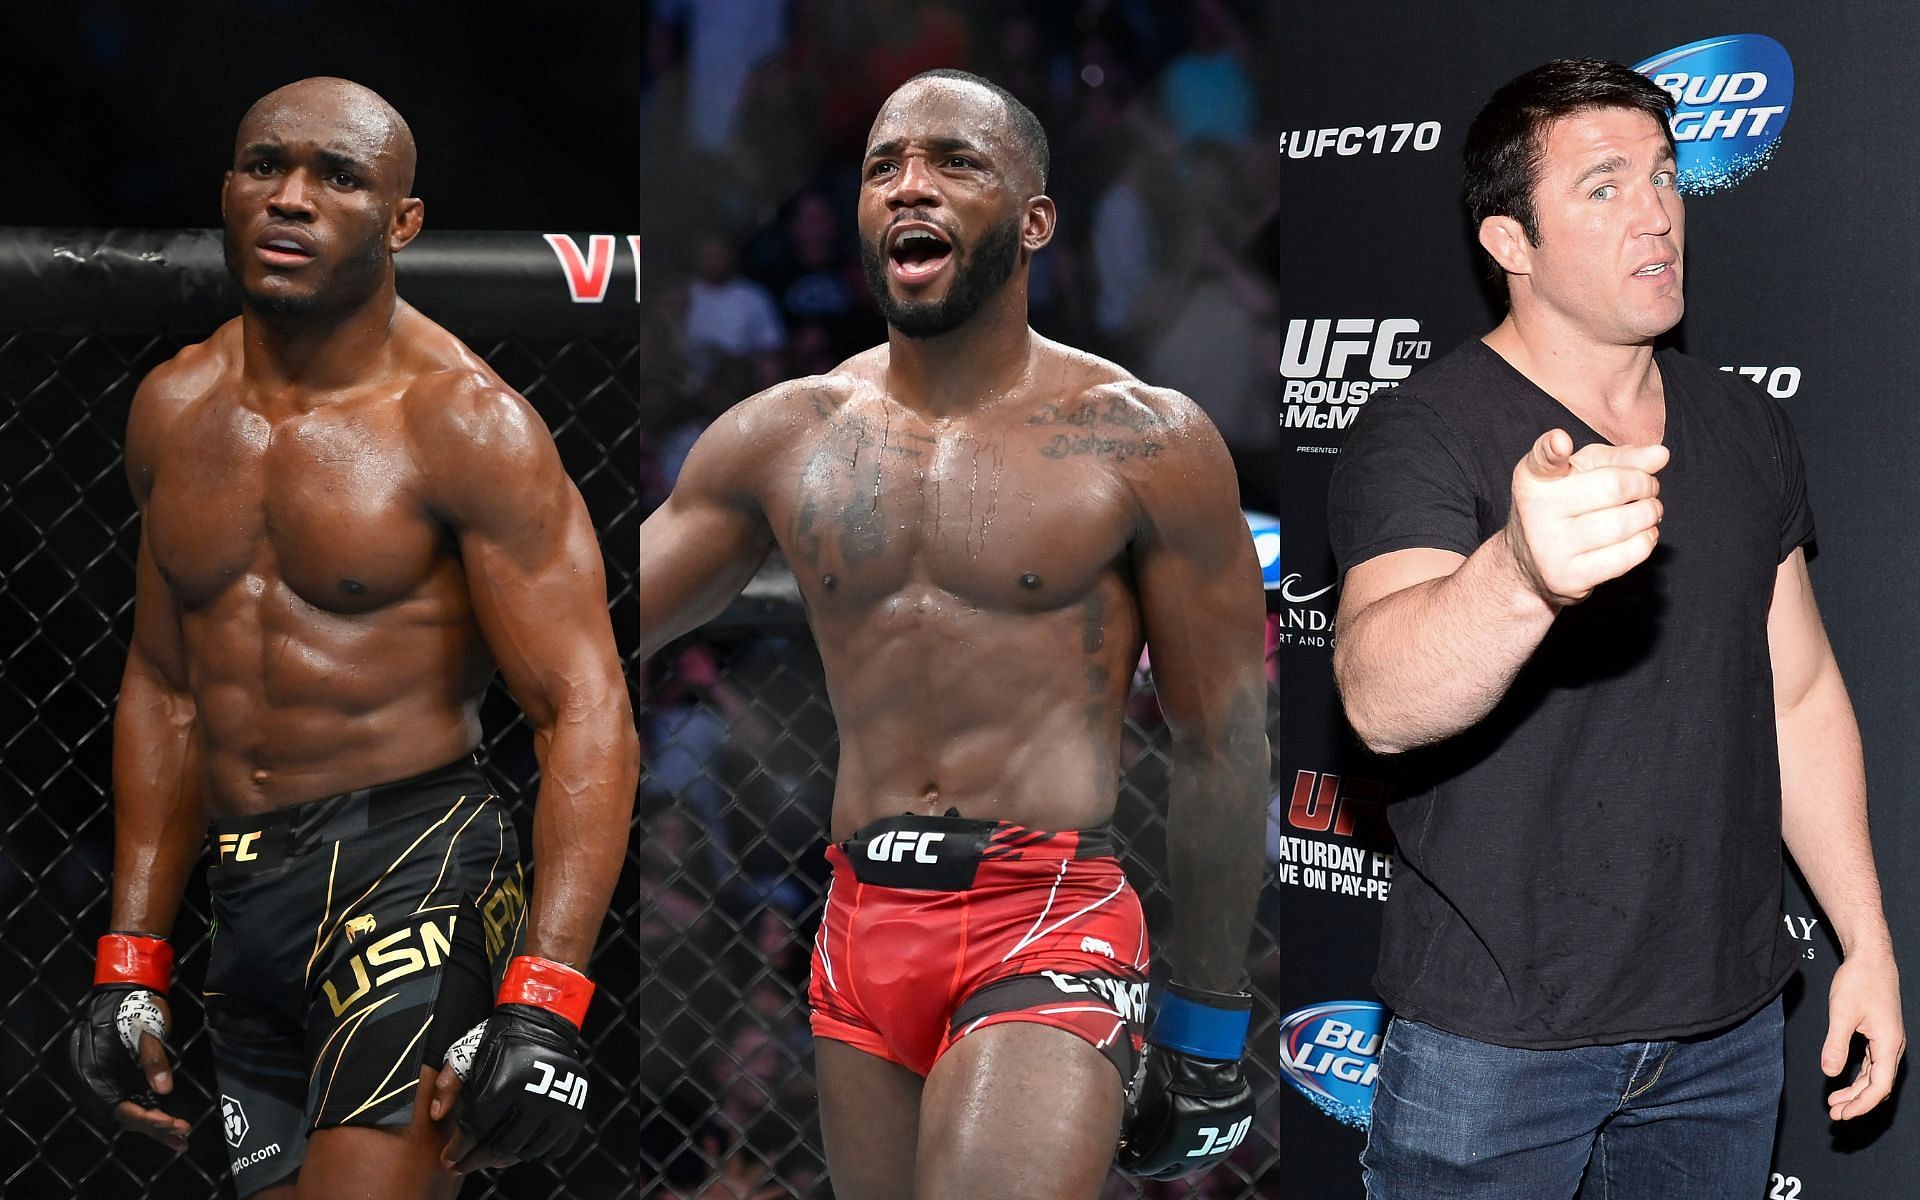 Kamaru Usman (Left), Leon Edwards (Middle), and Chael Sonnen (Right)